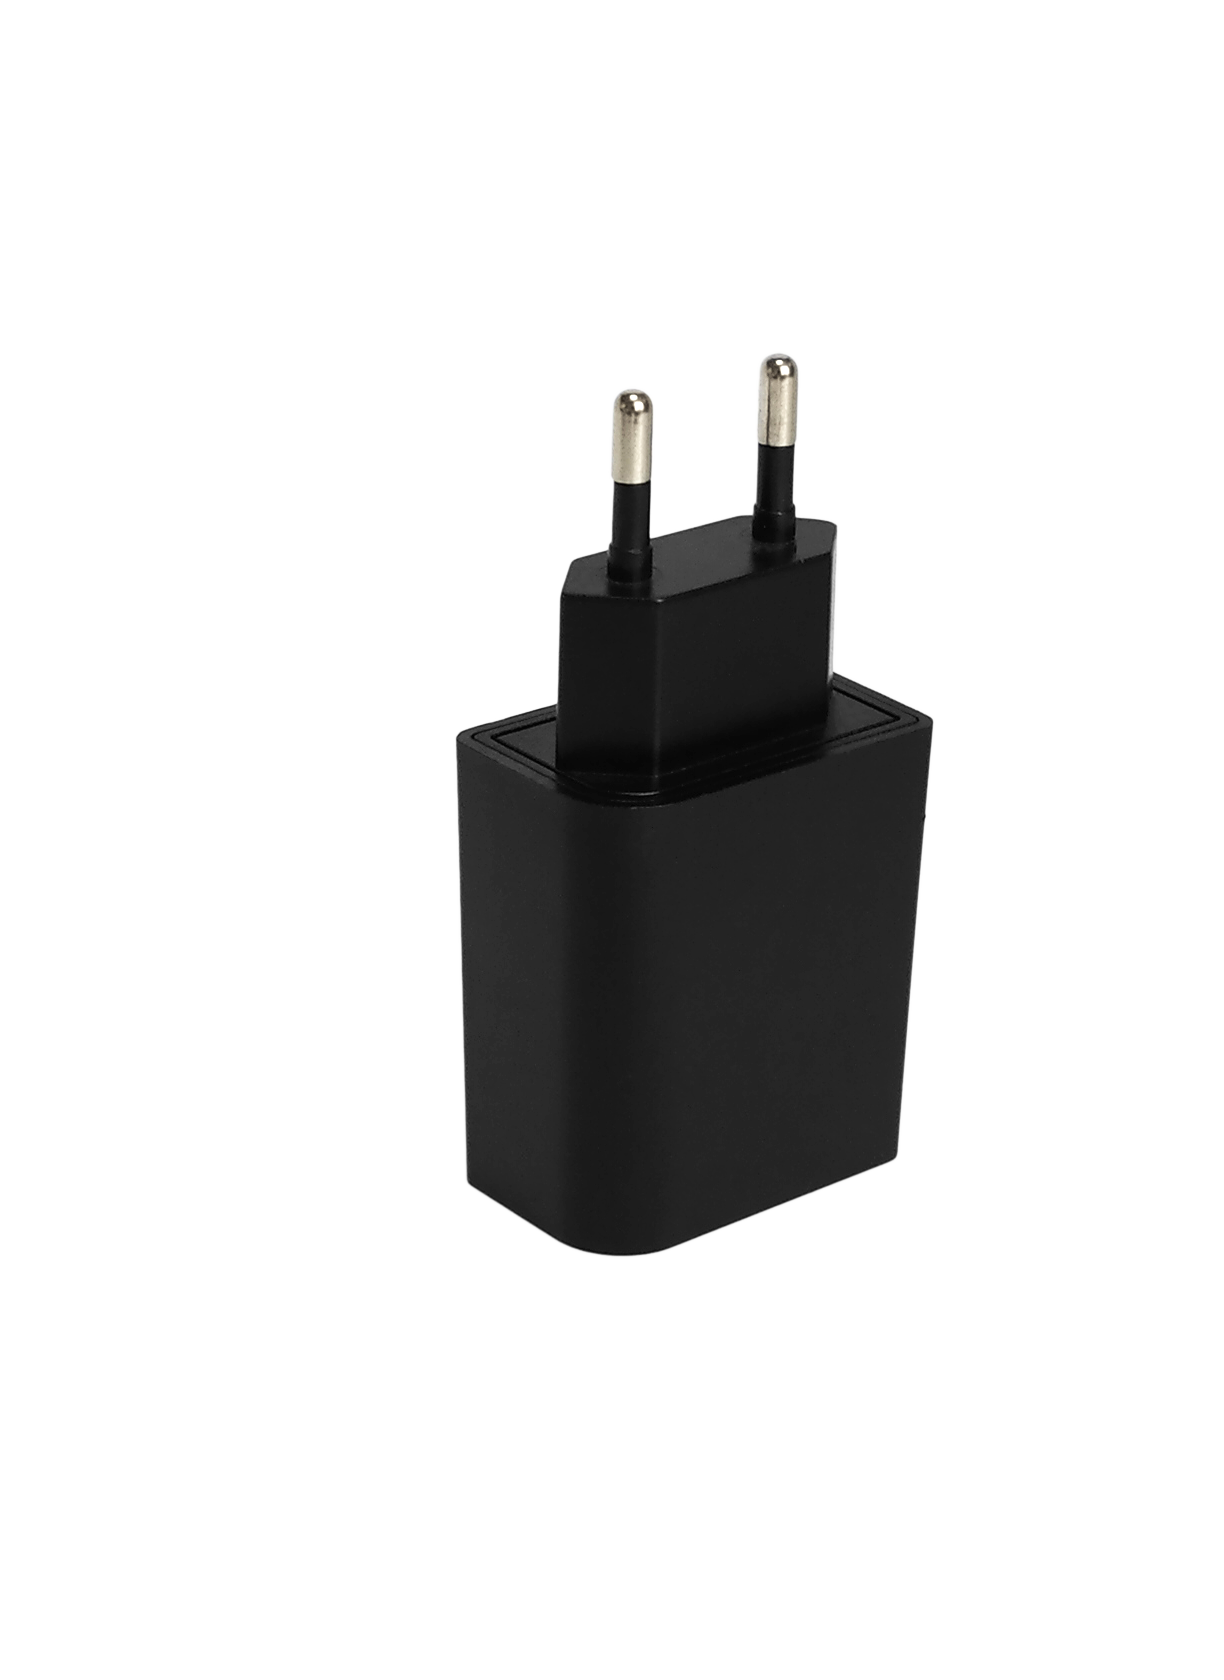 5V 1A&2A USB Wall Charger 